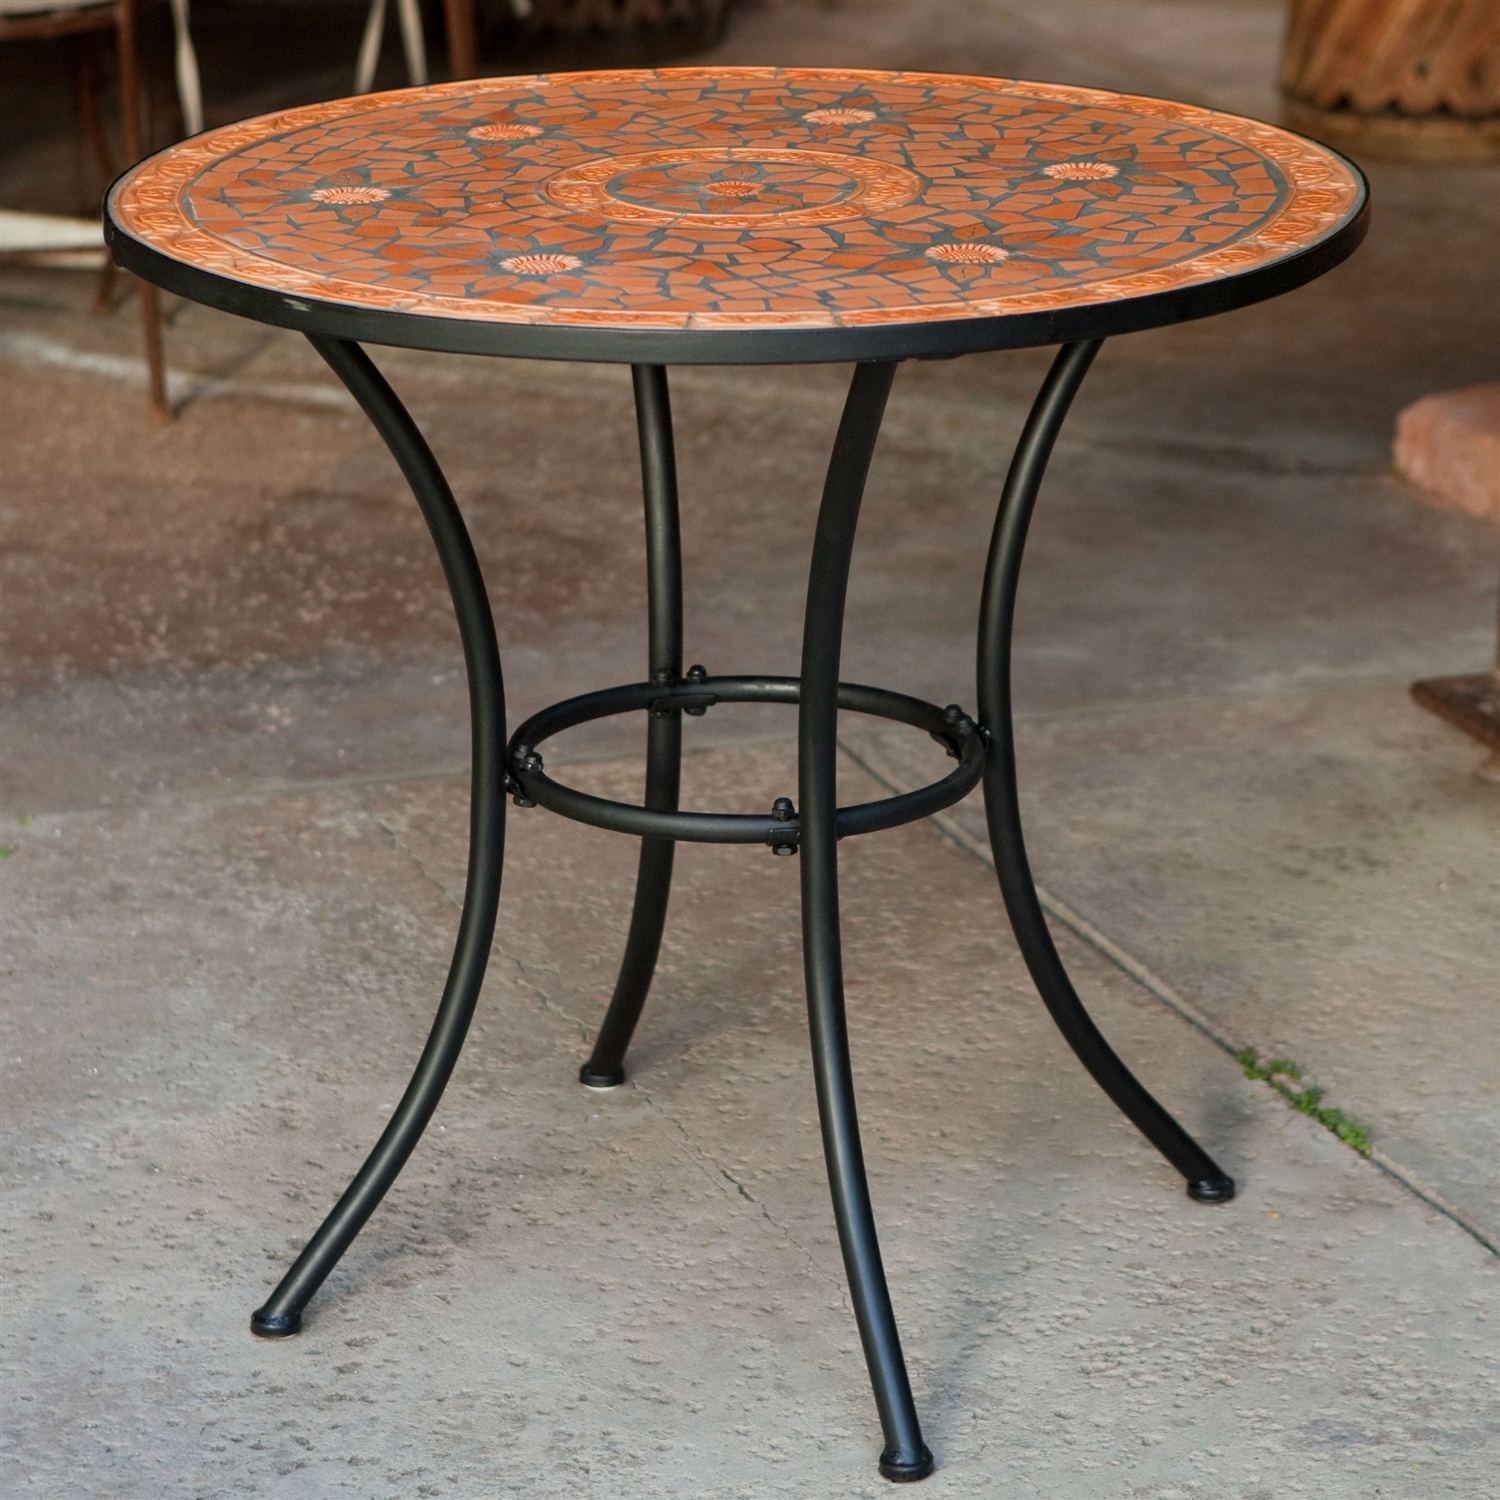 Round Outdoor Patio Bistro Table With, Mosaic Tiles Round Outdoor Coffee Table